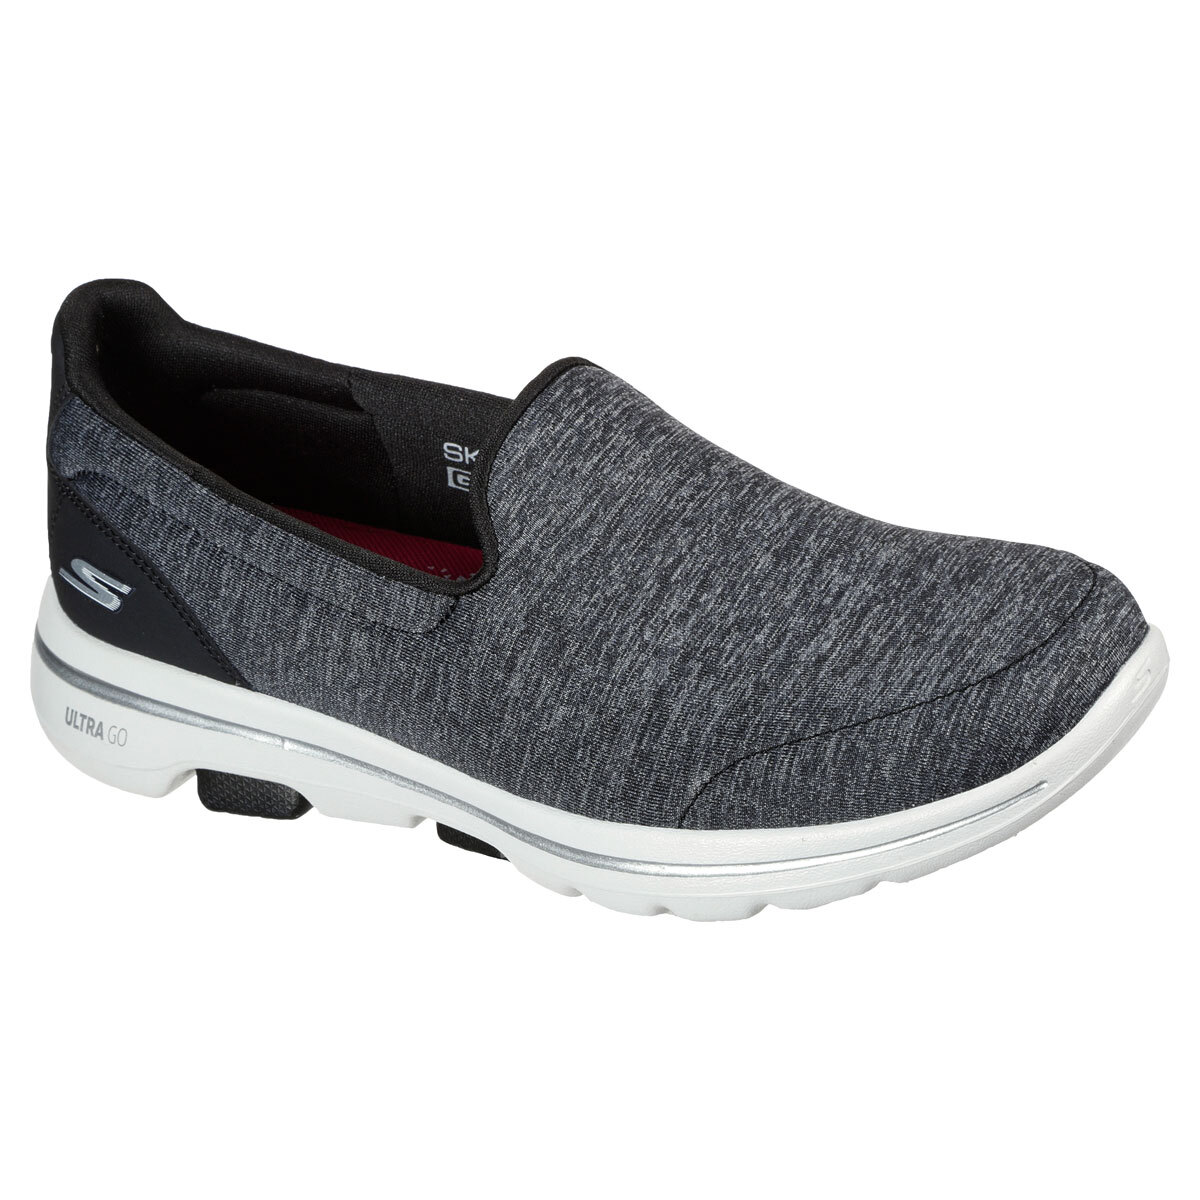 Skechers GOwalk 5 Honor Women's Shoes in 5 Colours and 7 Sizes